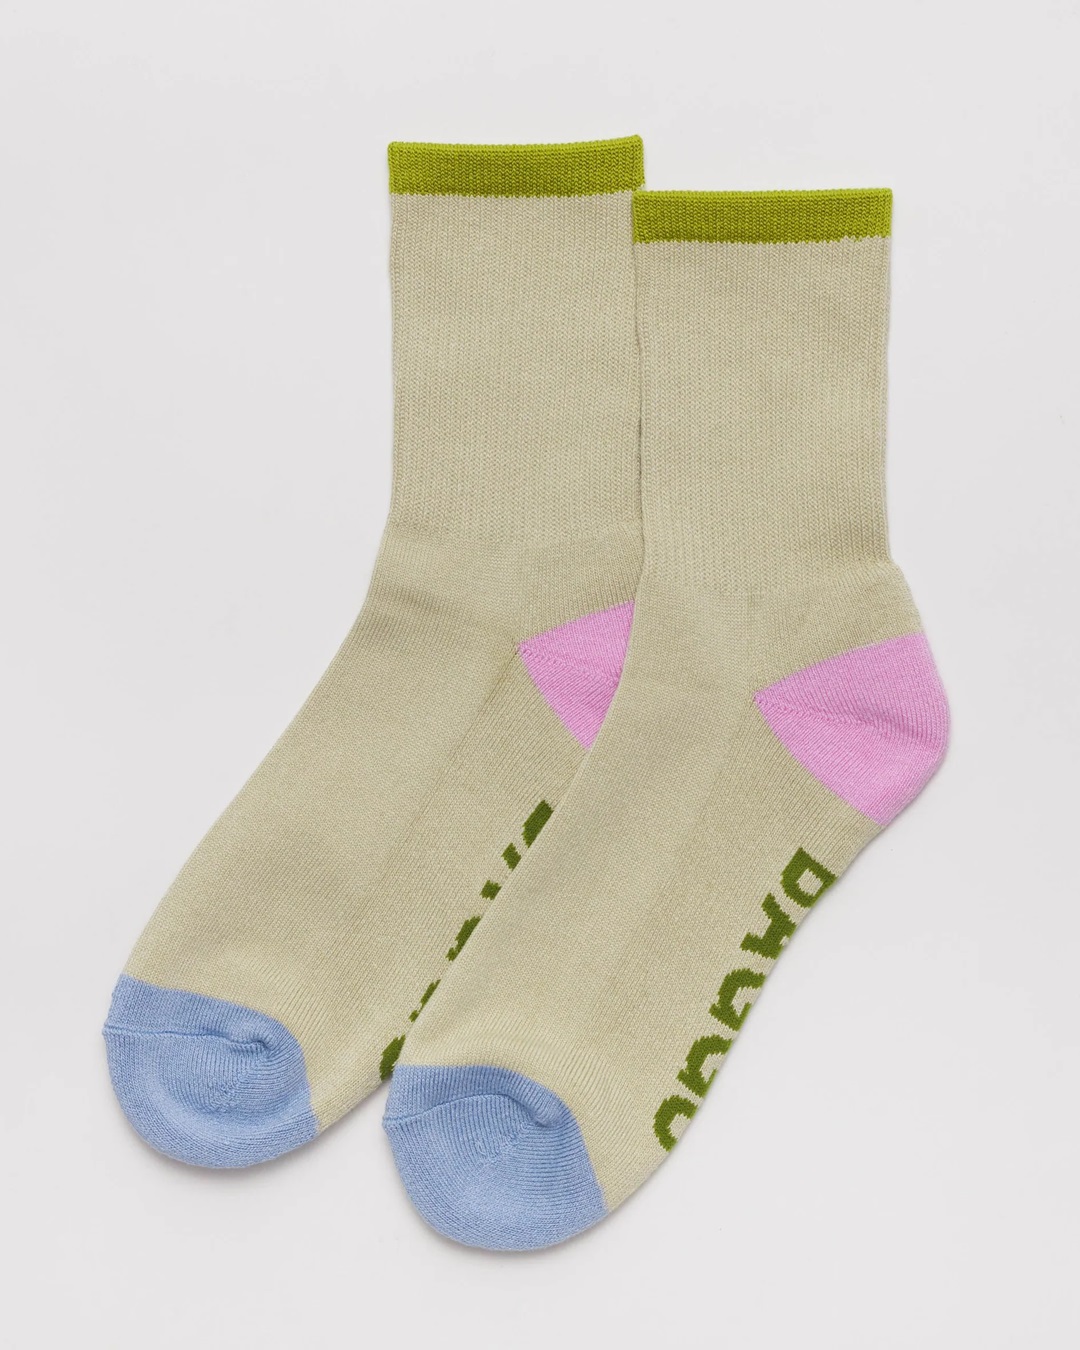 Stone pair of socks with blue coloured toes and pink heels